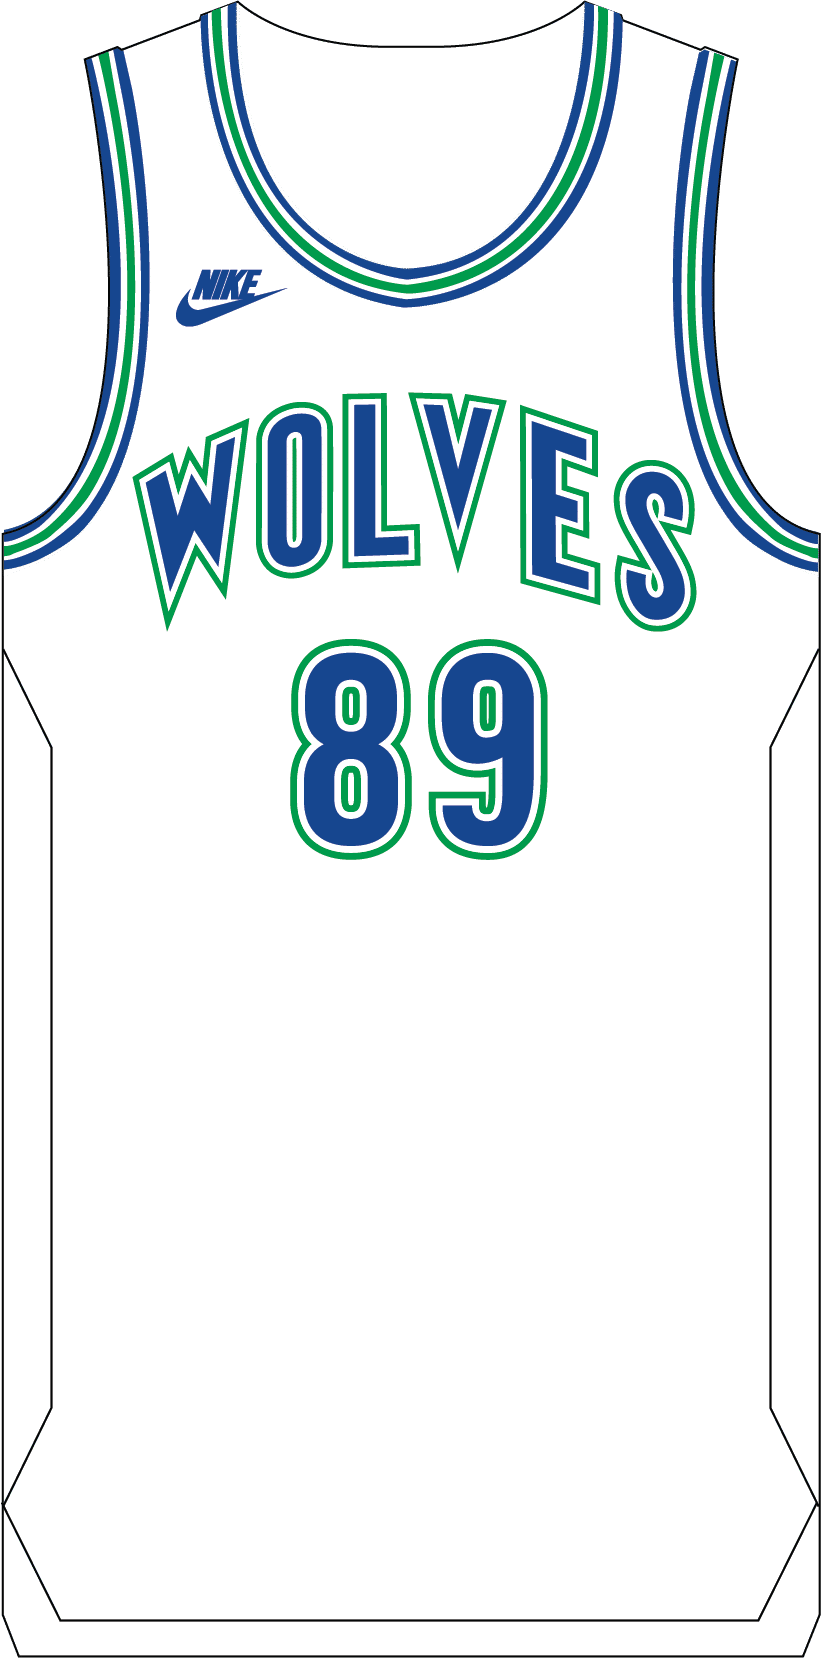 T-Wolves to Wear Classic '89 Uniforms 25 Times in 2023-24